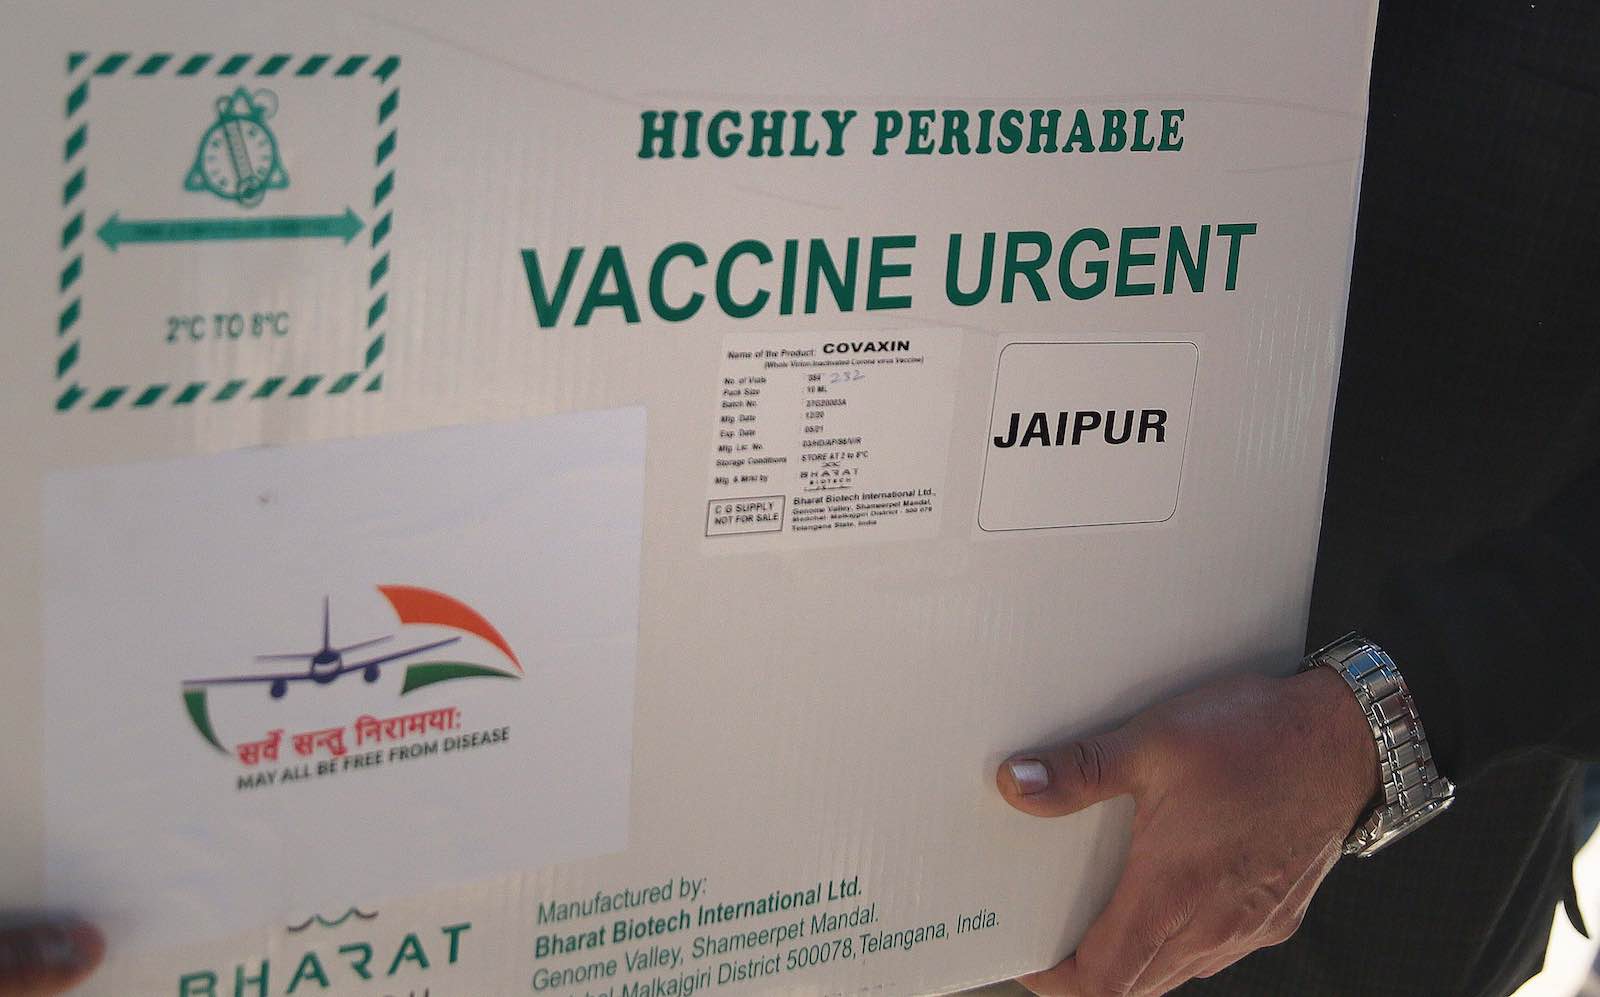 JAIPUR, INDIA - JANUARY 13: Health workers carry a carton containing vaccines during the delivery of the first consignment of 1000 vials of Bharat Biotech's COVAXIN arrived to start Covid-19 vaccination drive from January 16, at State Vaccine Centre on January 13, 2021 in Jaipur, India. (Photo by Himanshu Vyas/Hindustan Times via Getty Images)